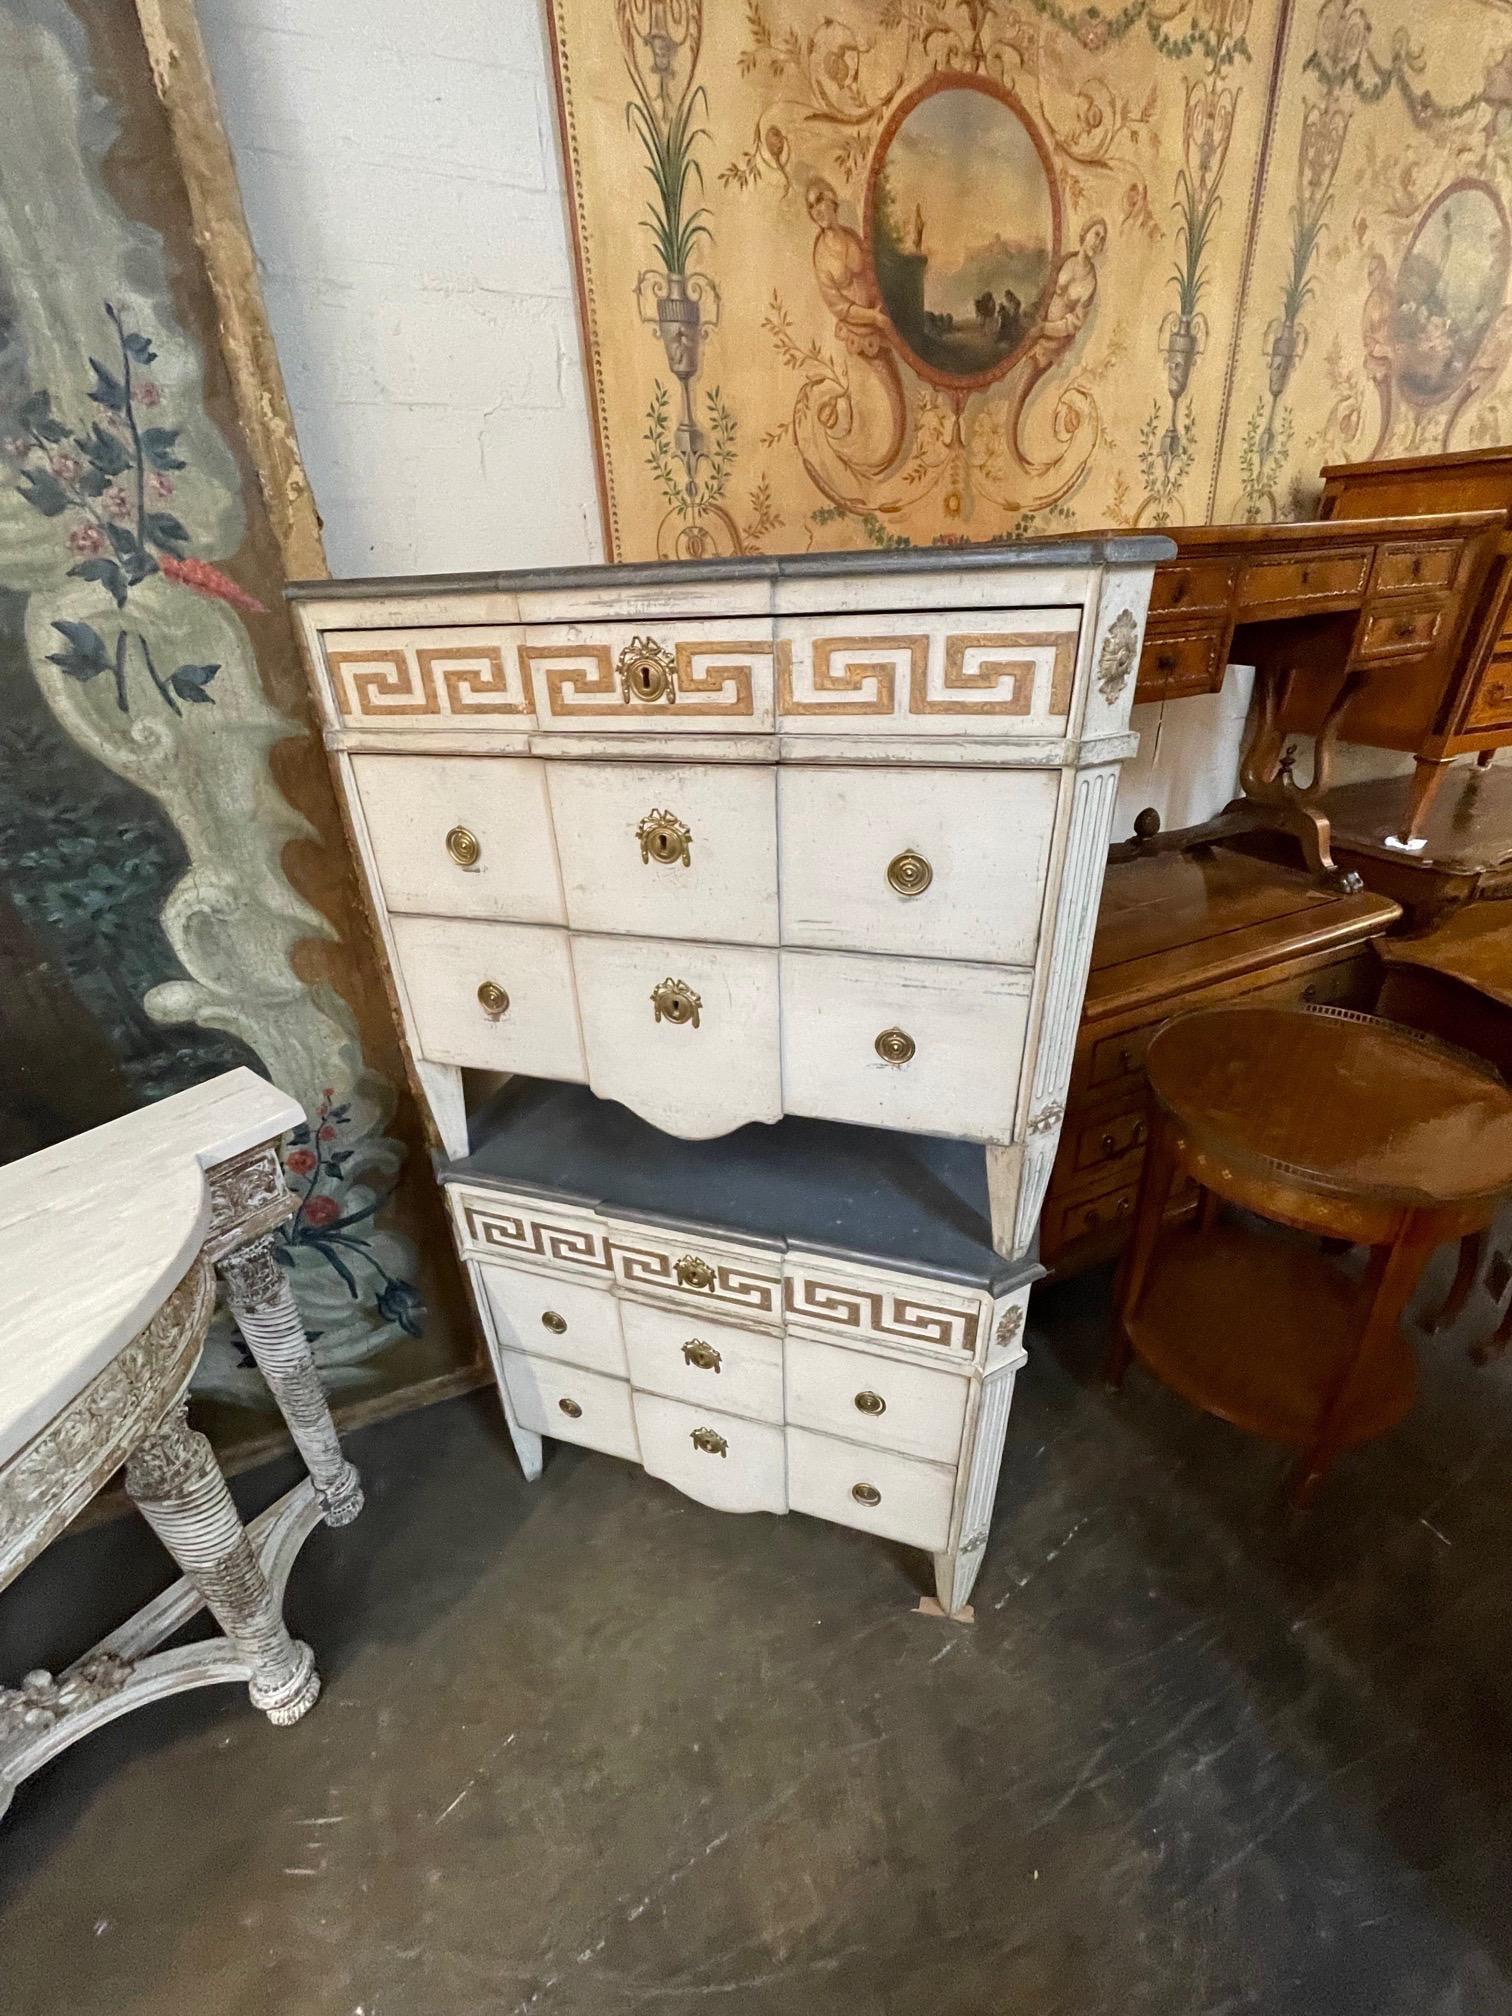 Lovely pair of 19th century Swedish carved and painted chests with Greek Key pattern. Very fine patina and three drawers for storage. A stylish pair for a variety of decors!